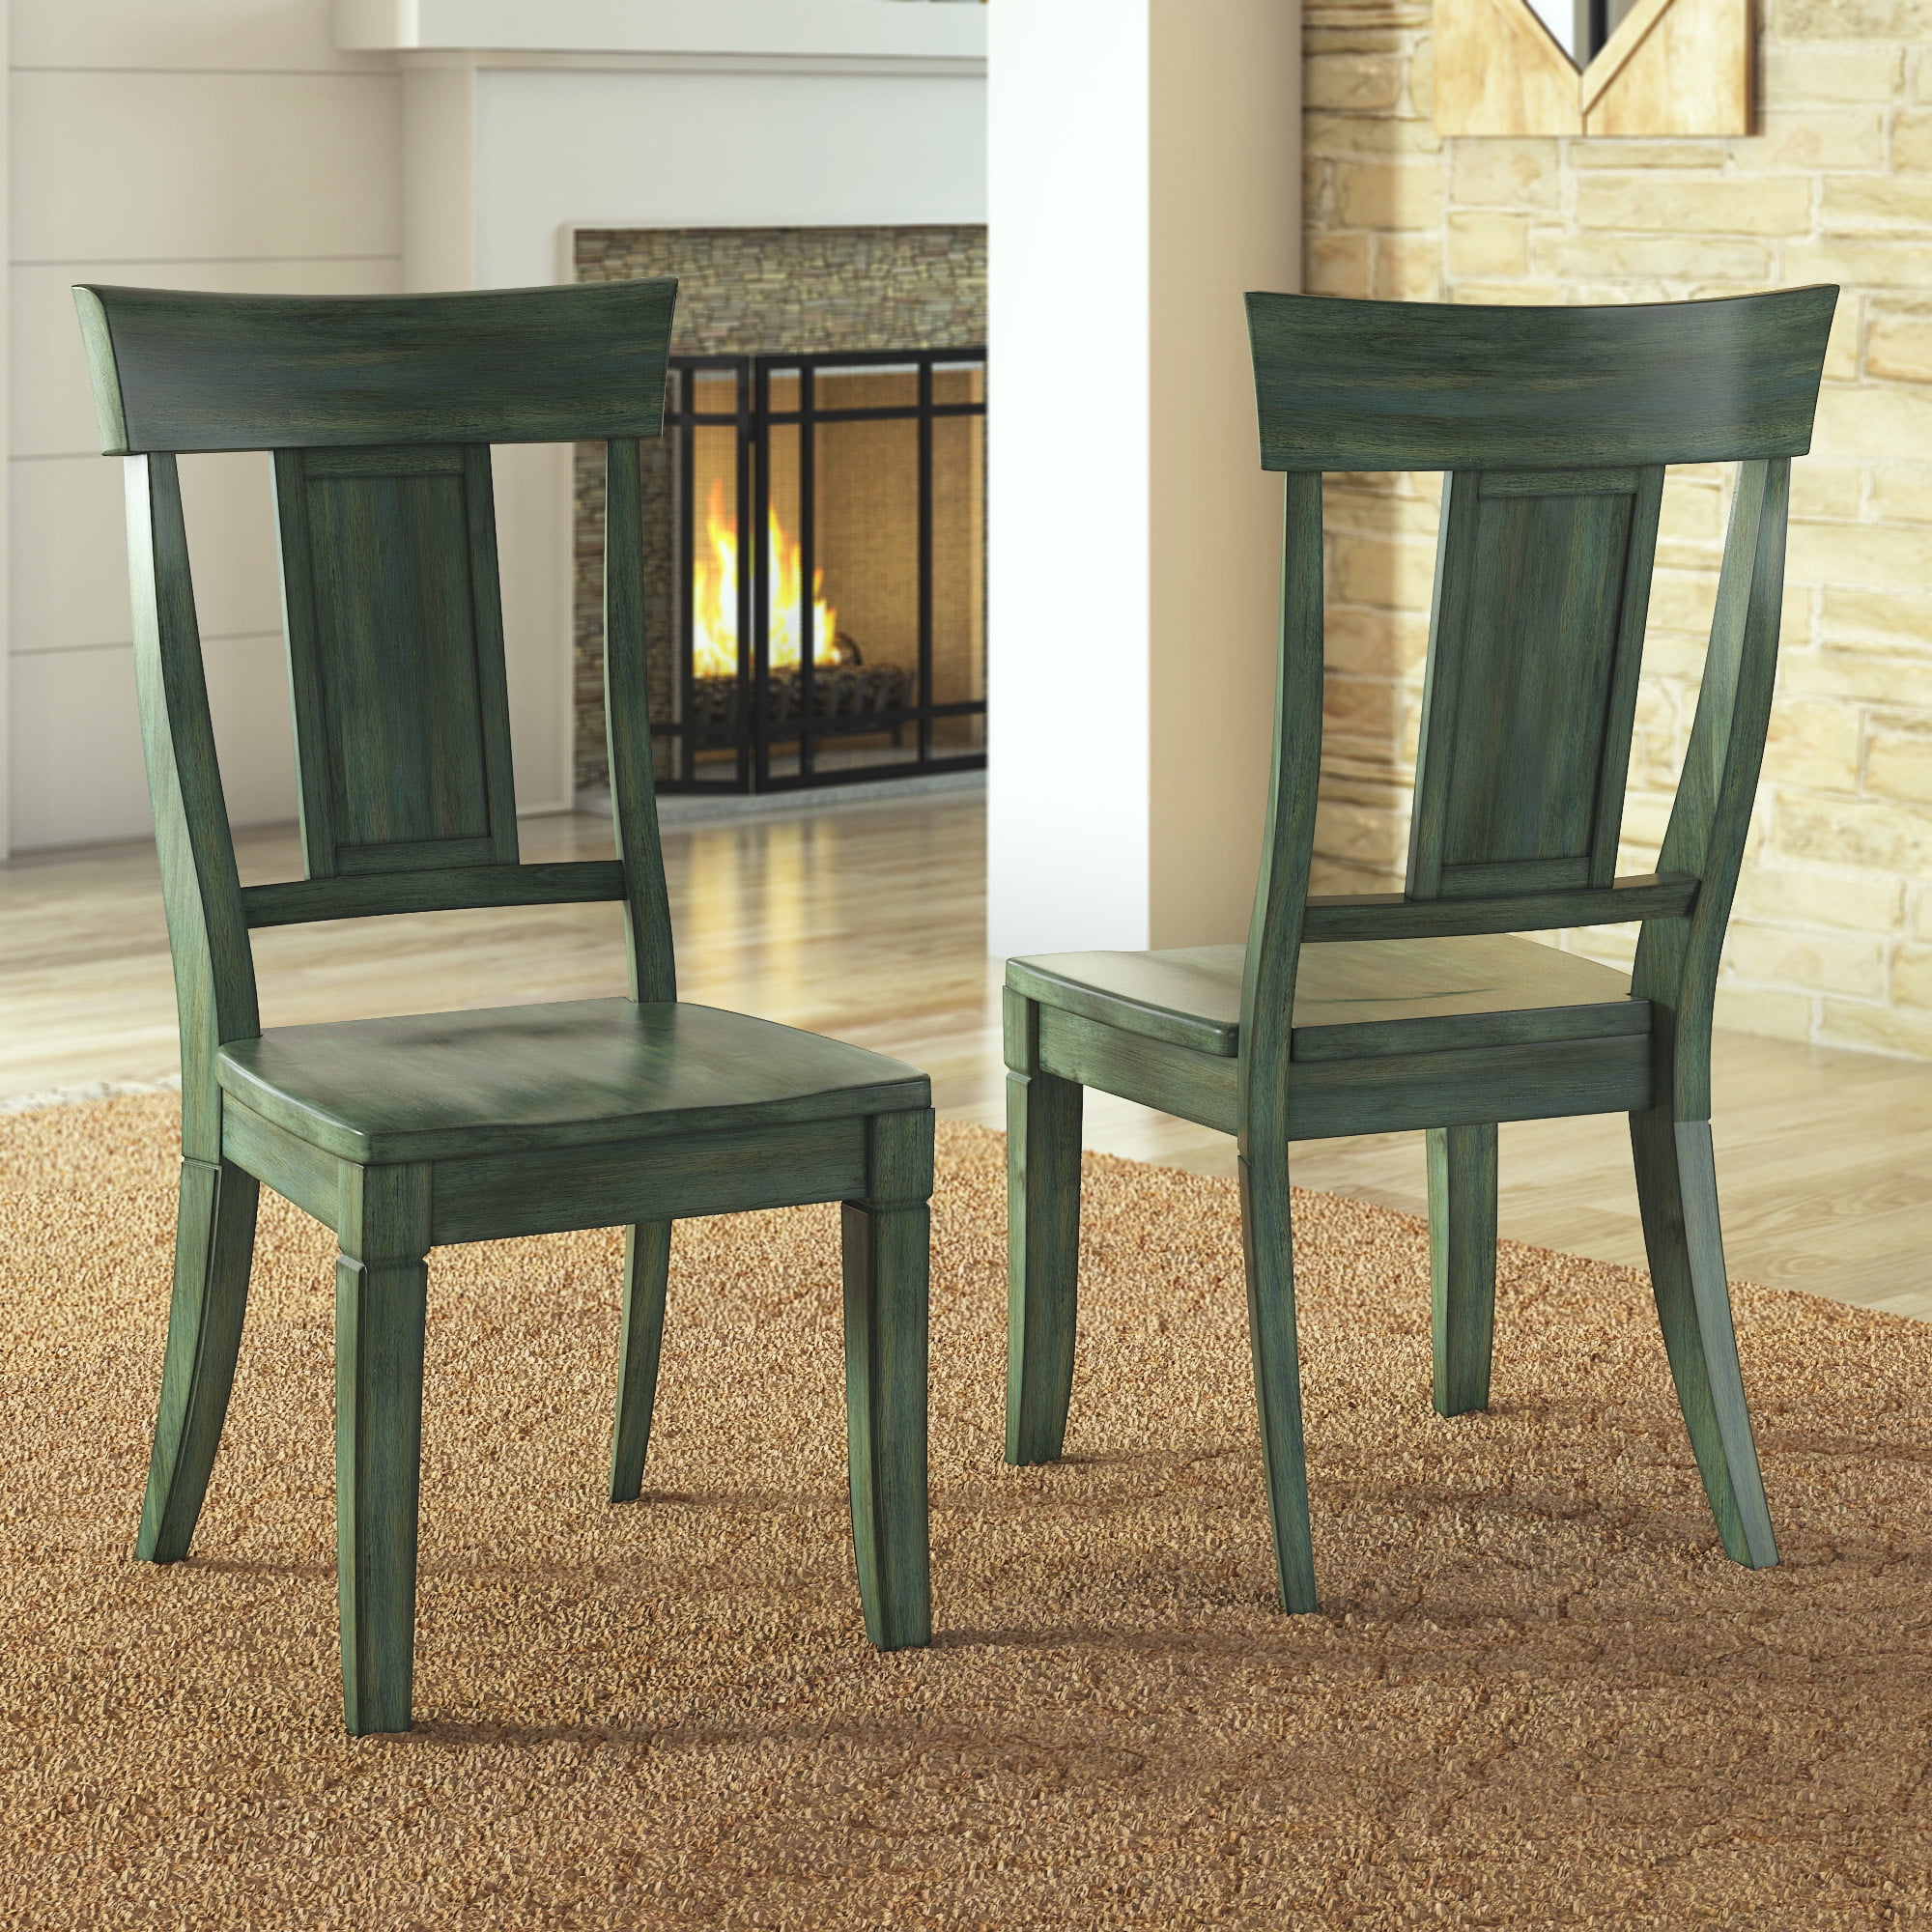 Weston Home Farmhouse Wood Dining Chair with Panel Back, Set of 2